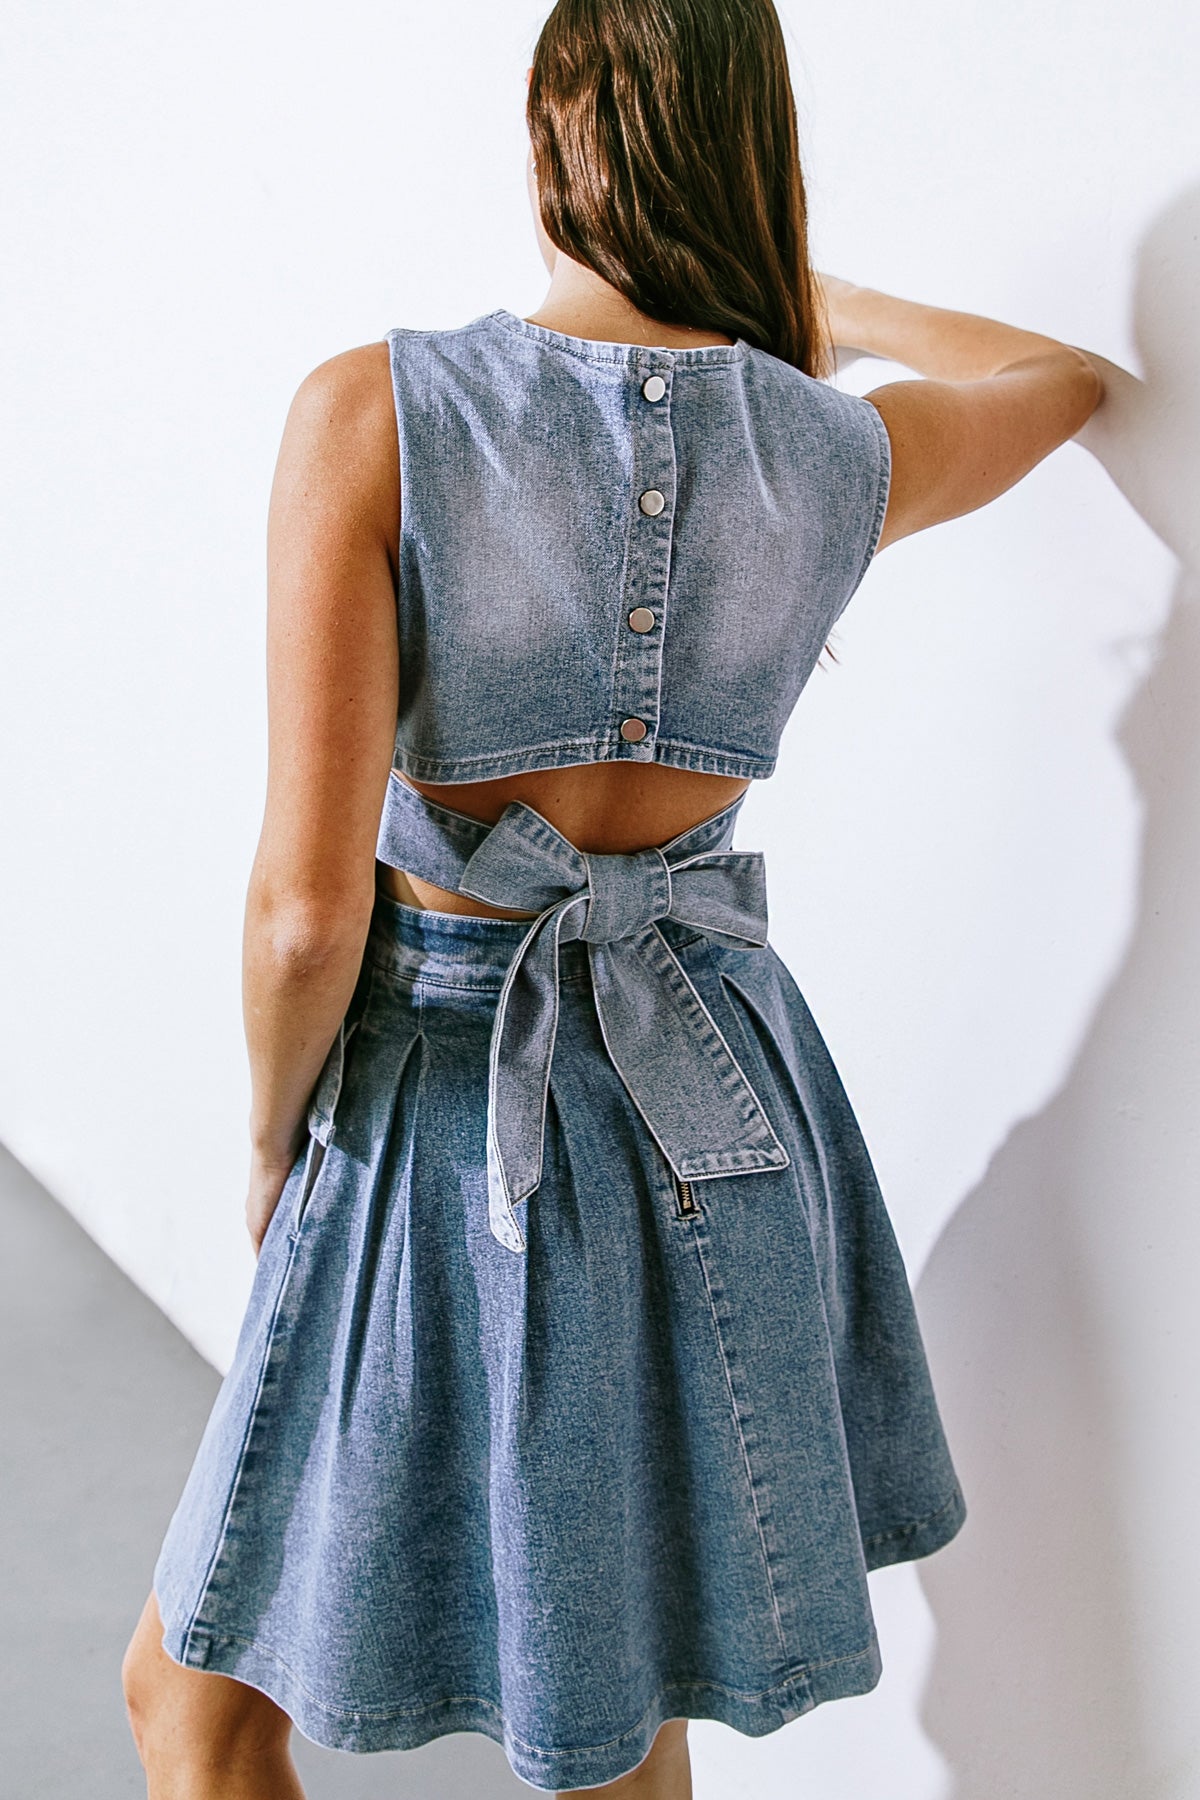 BE THE BRIGHTEST DENIM TOP